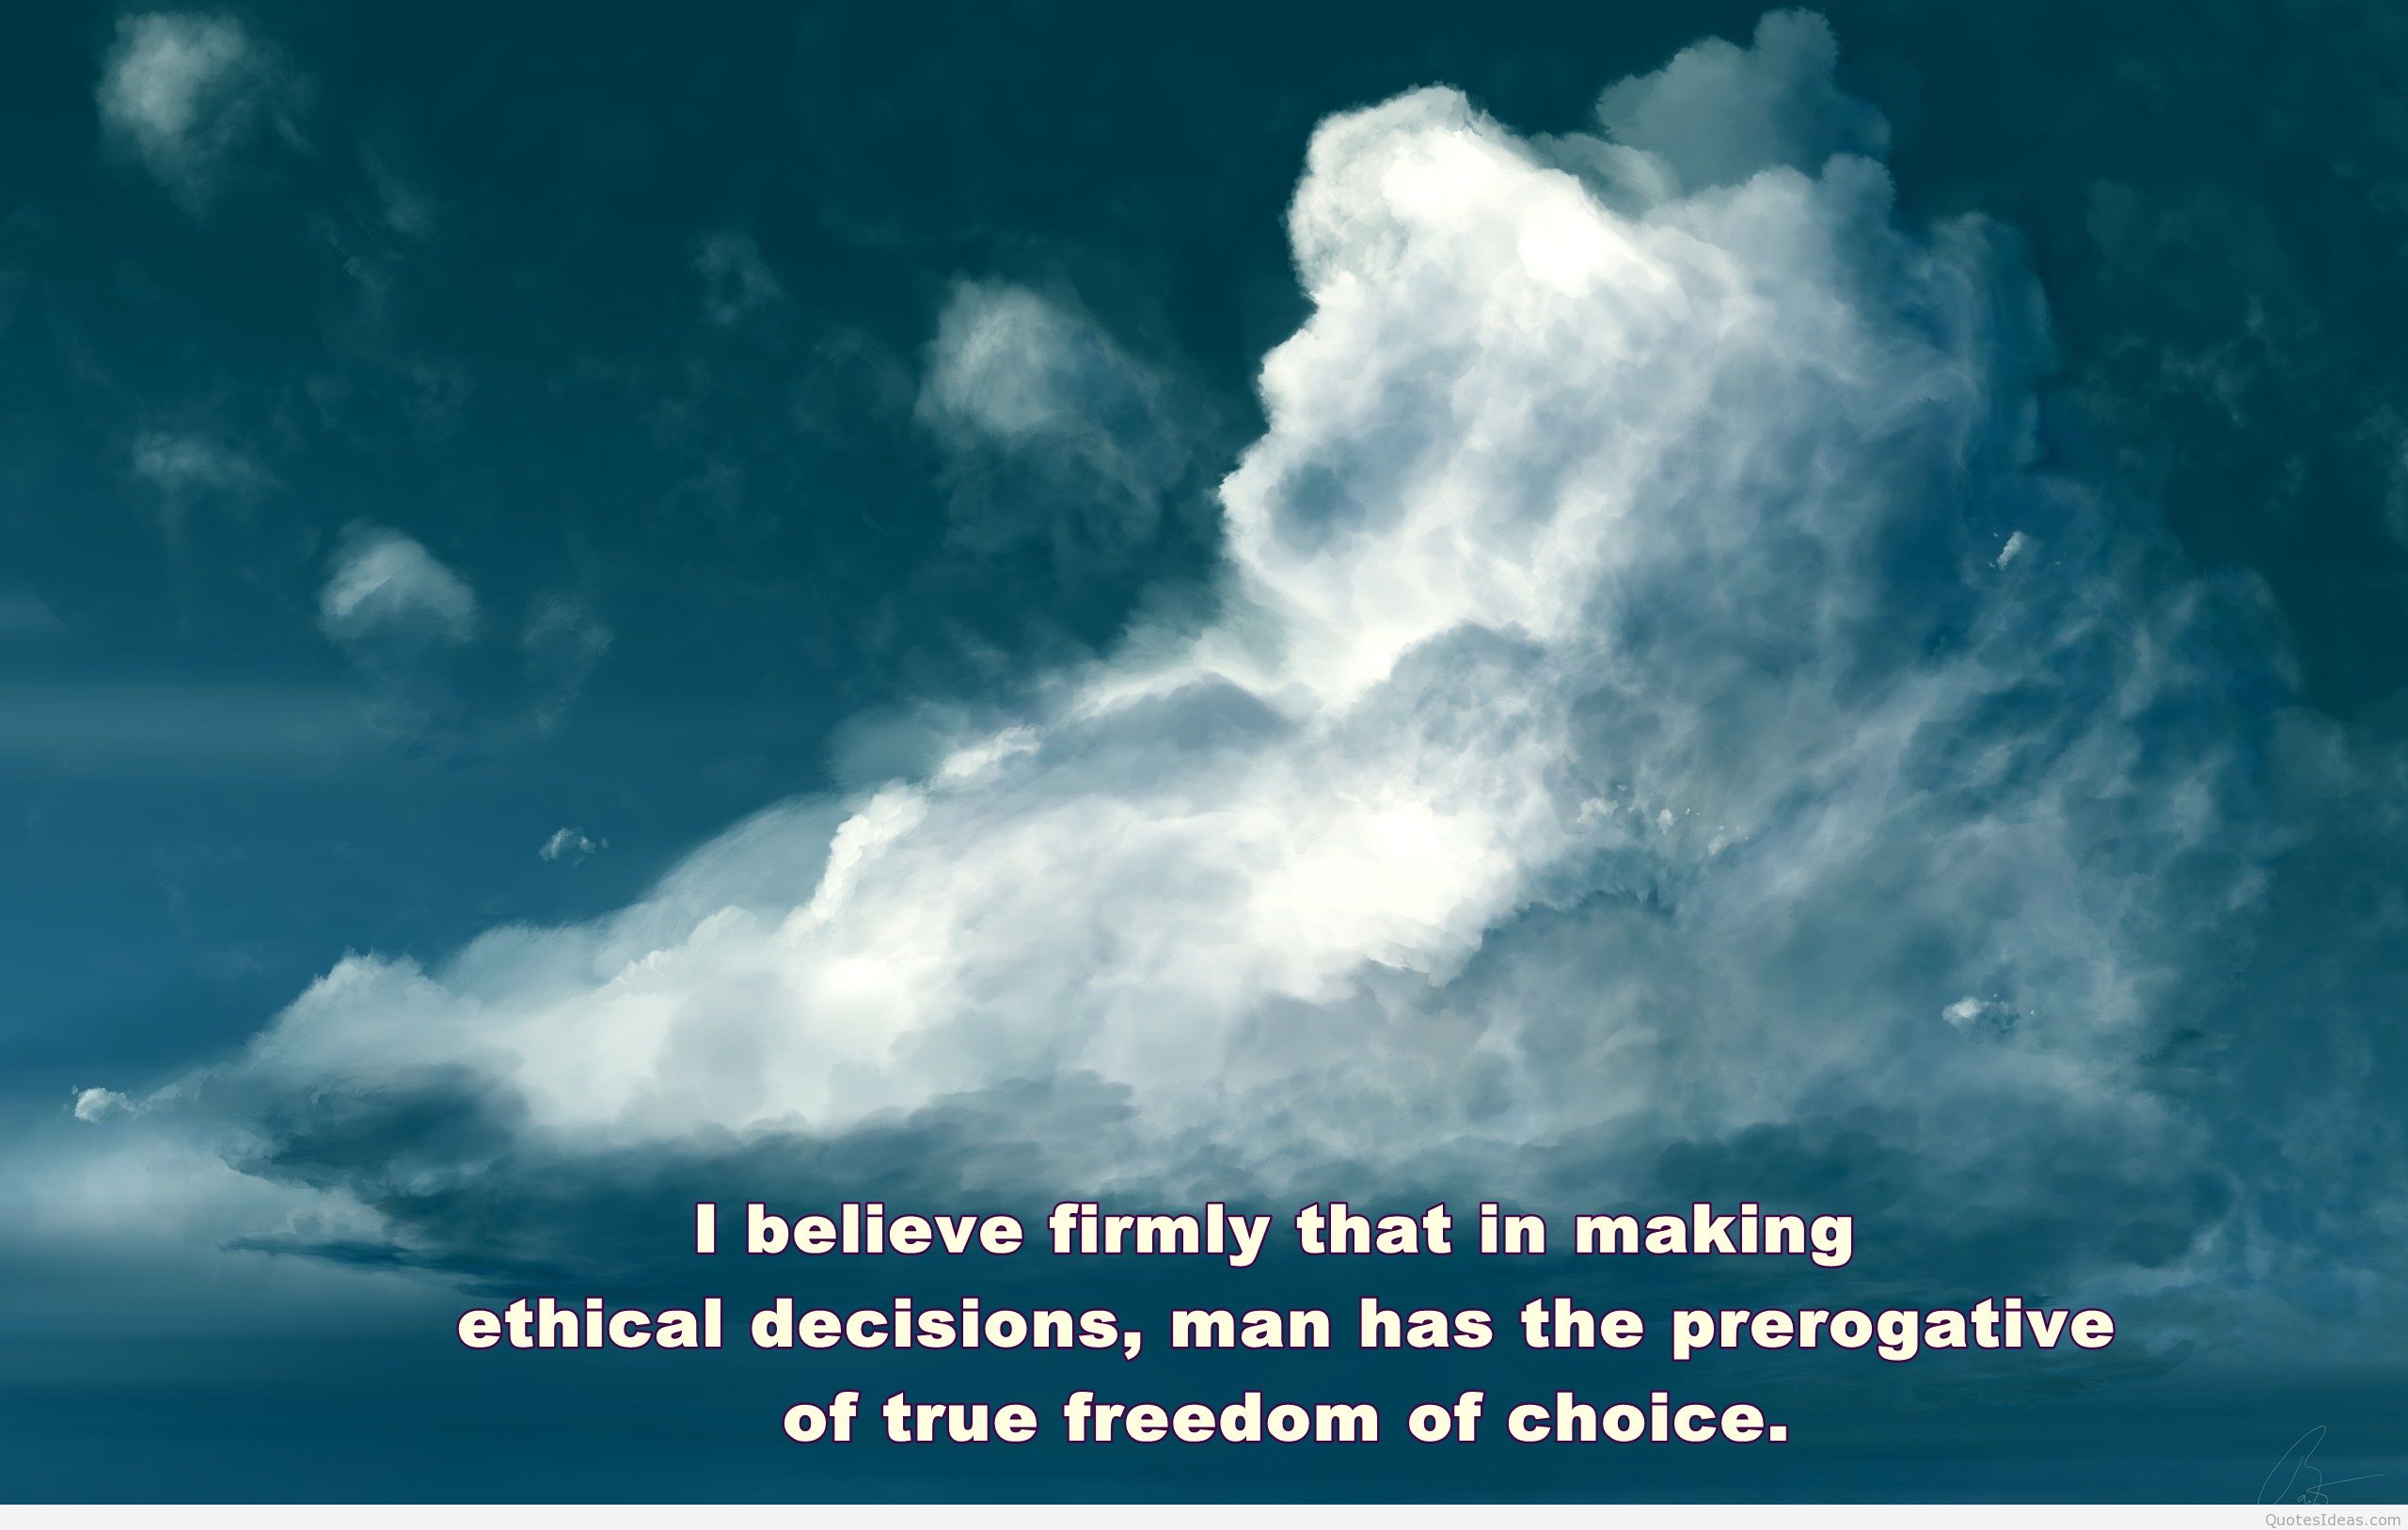 I believe firmly that in making ethical decisions, man has the prerogative of true freedom of choice